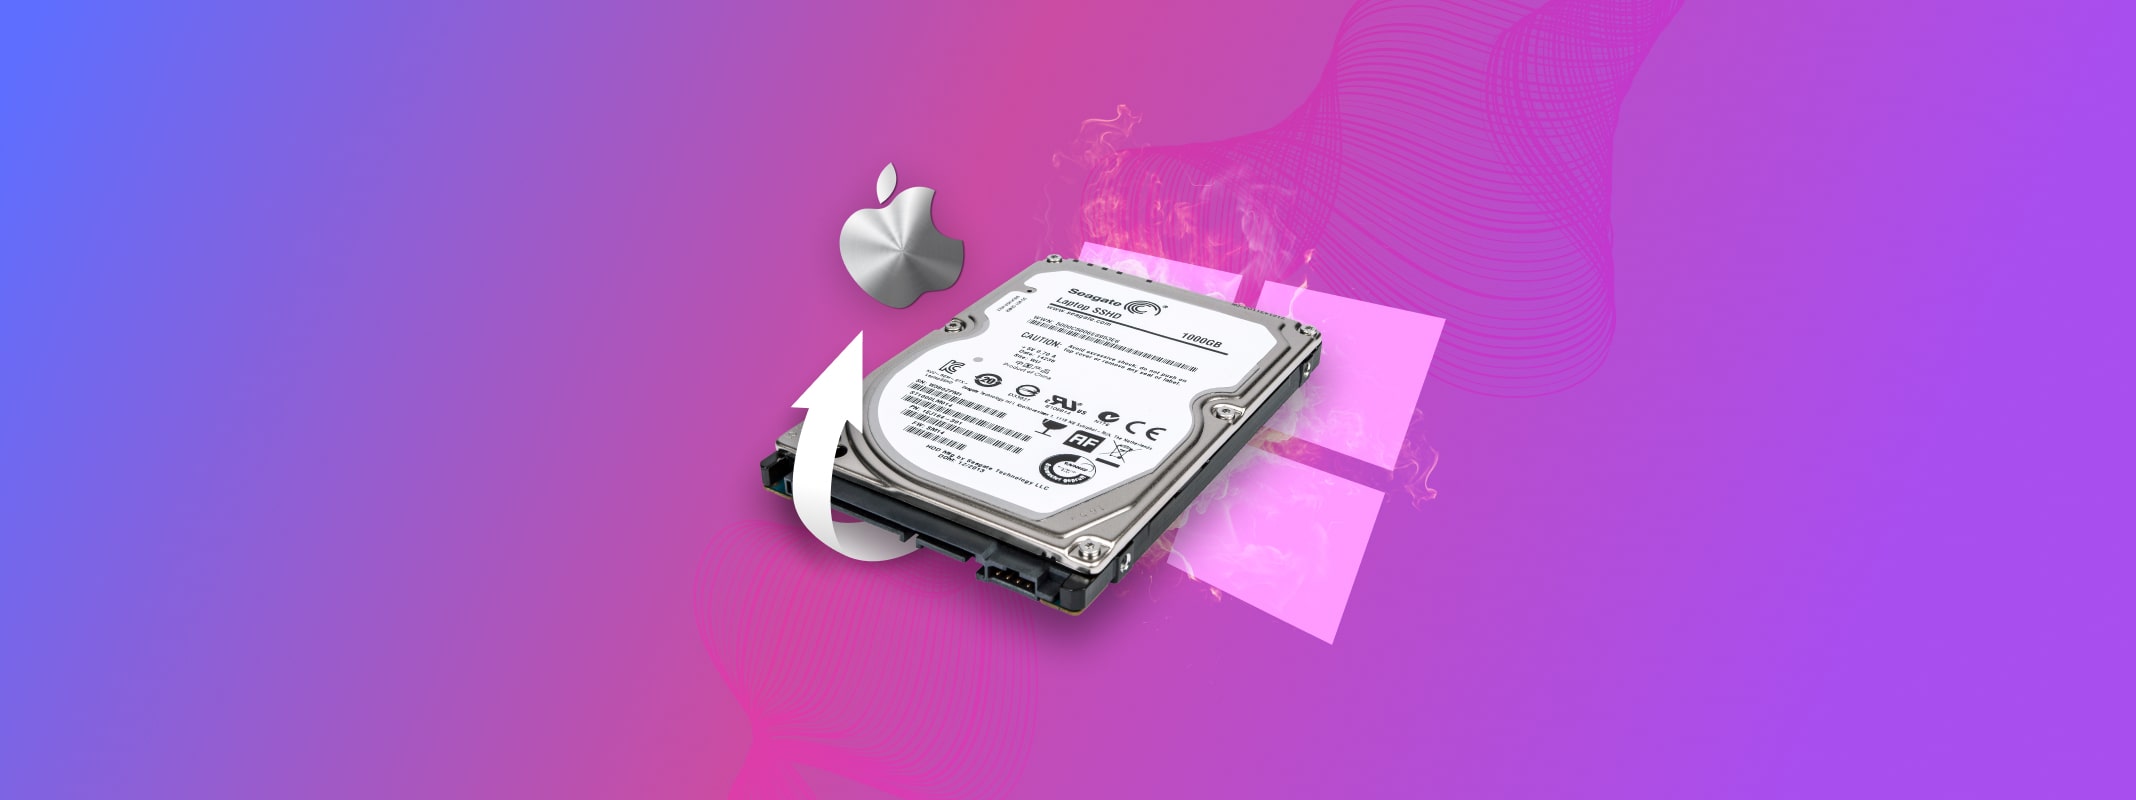 How to Format Mac Hard Drive for Windows Losing